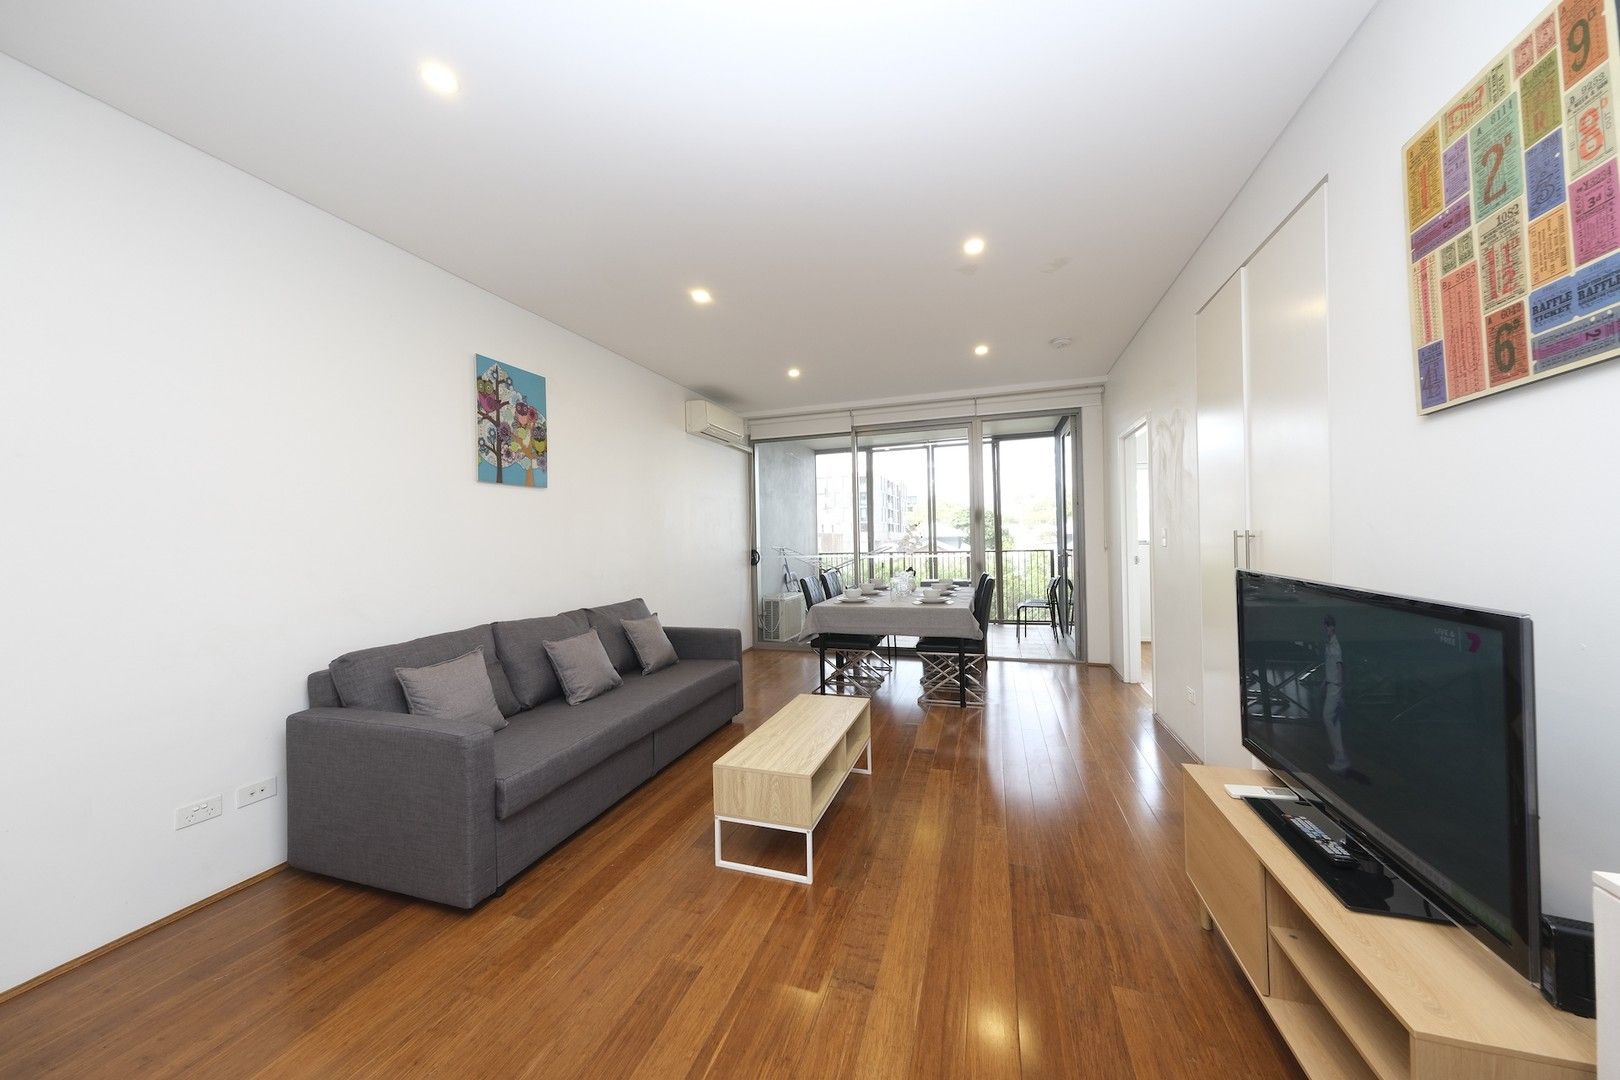 2 bedrooms Apartment / Unit / Flat in 791 Botany Rd ROSEBERY NSW, 2018